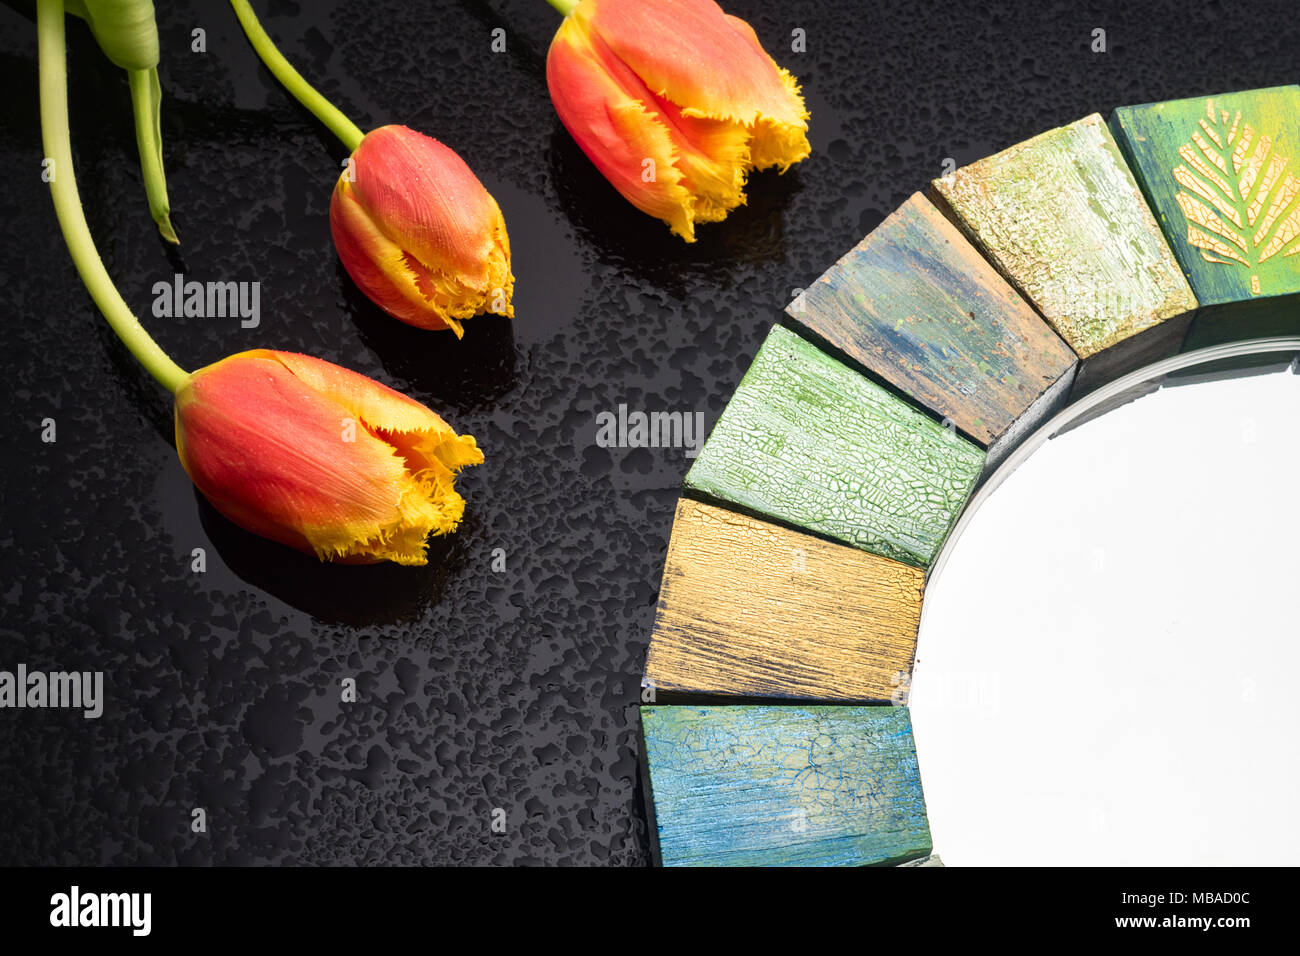 Interior design mirror handmade in wooden frame with bouquet of spring tulips Stock Photo